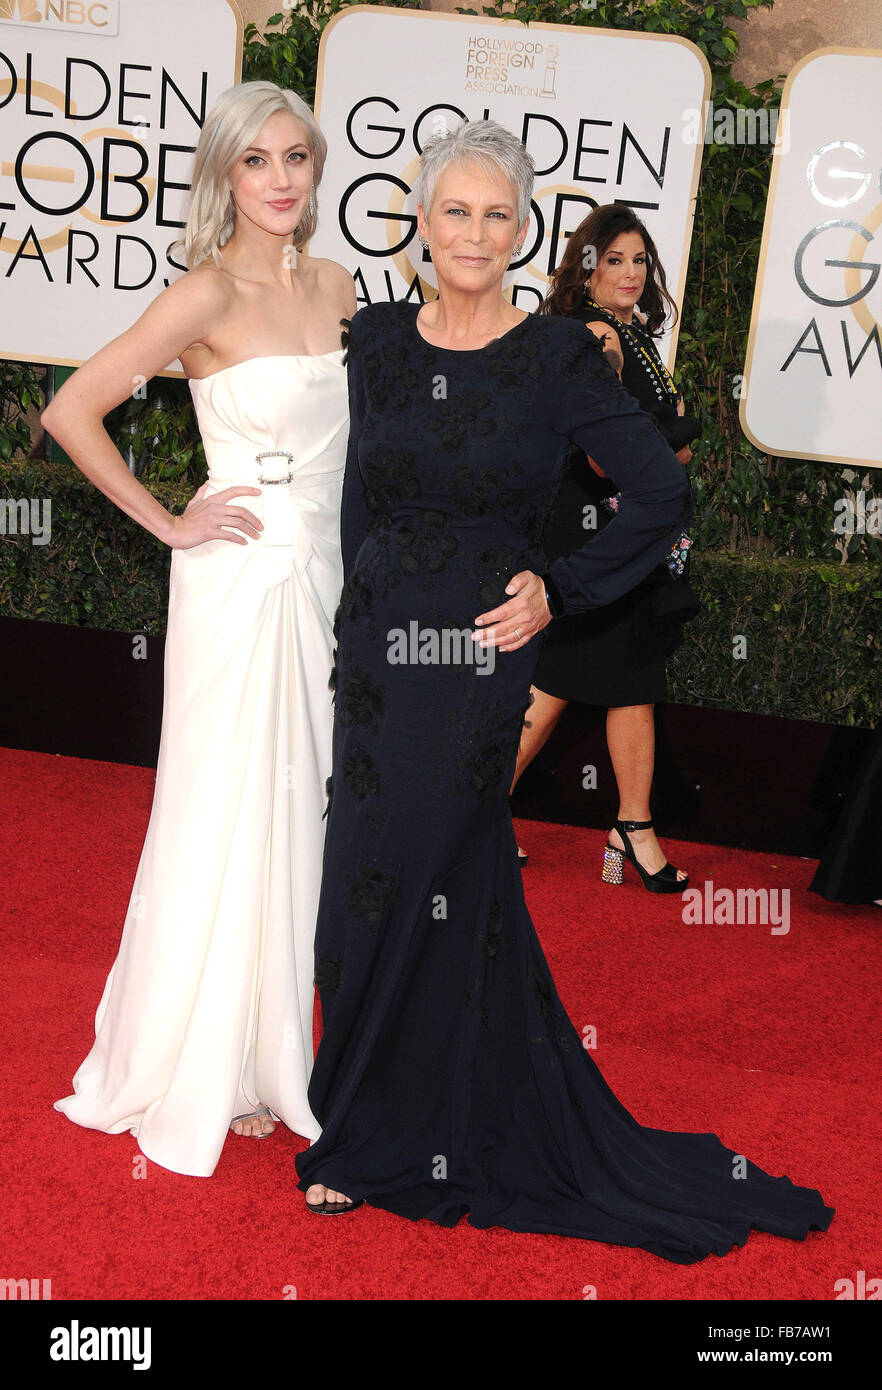 Los Angeles, California, USA. 10th Jan, 2016. Jan 10th 2016 - Los Angeles California USA - Actress JAMIE LEE CURTIS, ANNIE GUEST at the 73rd Golden Globe Awards - Arrivals held at the Beverly Hills Hotel, Los Angeles CA. © Paul Fenton/ZUMA Wire/Alamy Live News Stock Photo